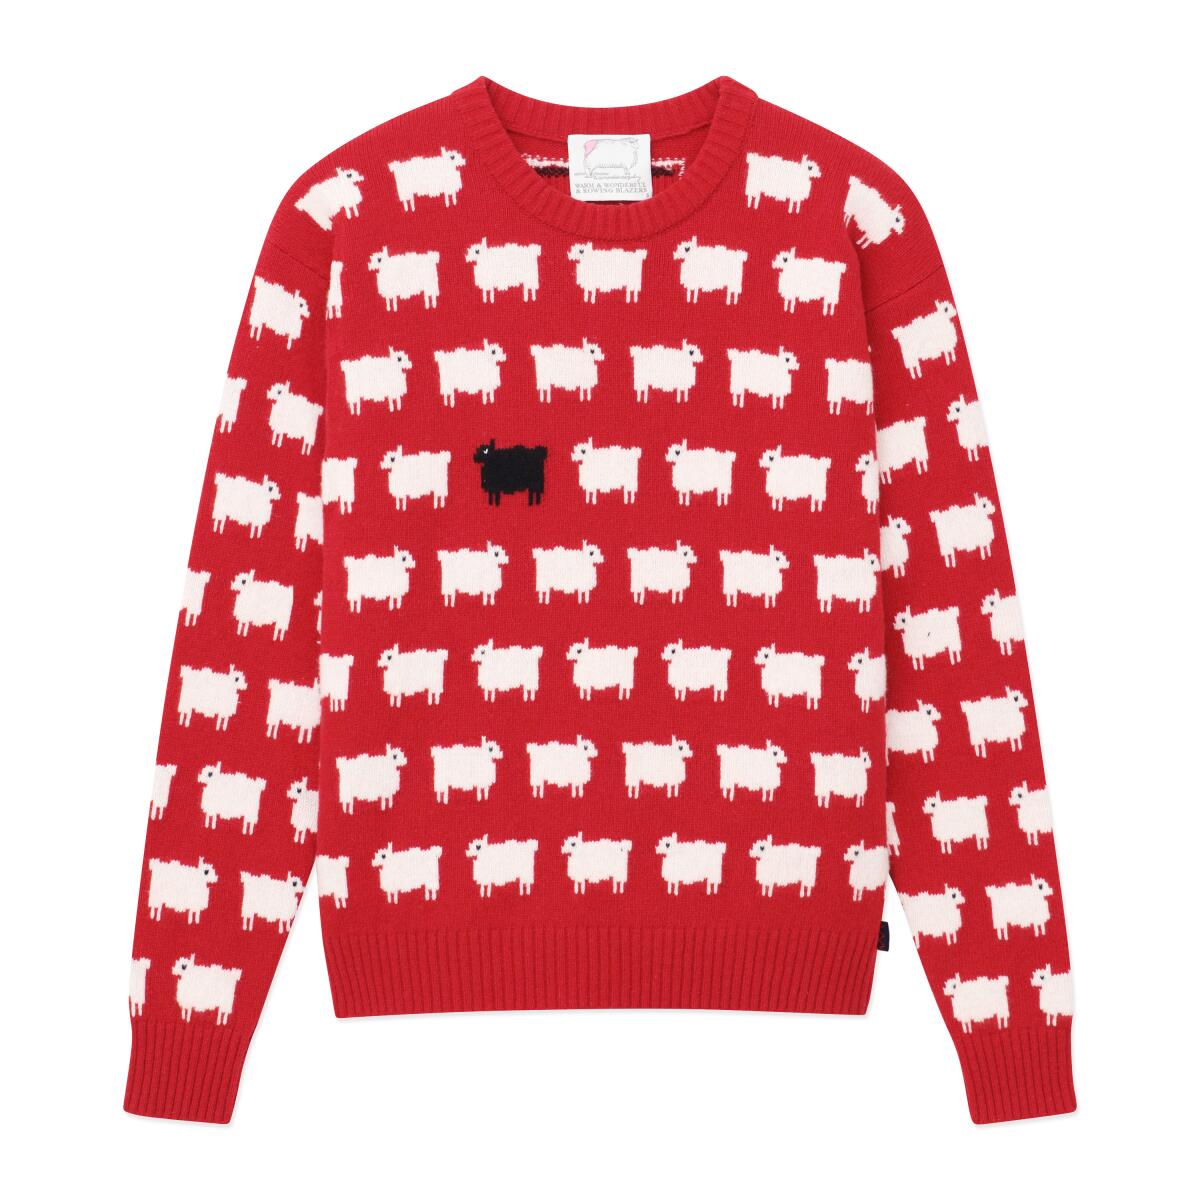 A photo of a sheep sweater from Rowing Blazers.